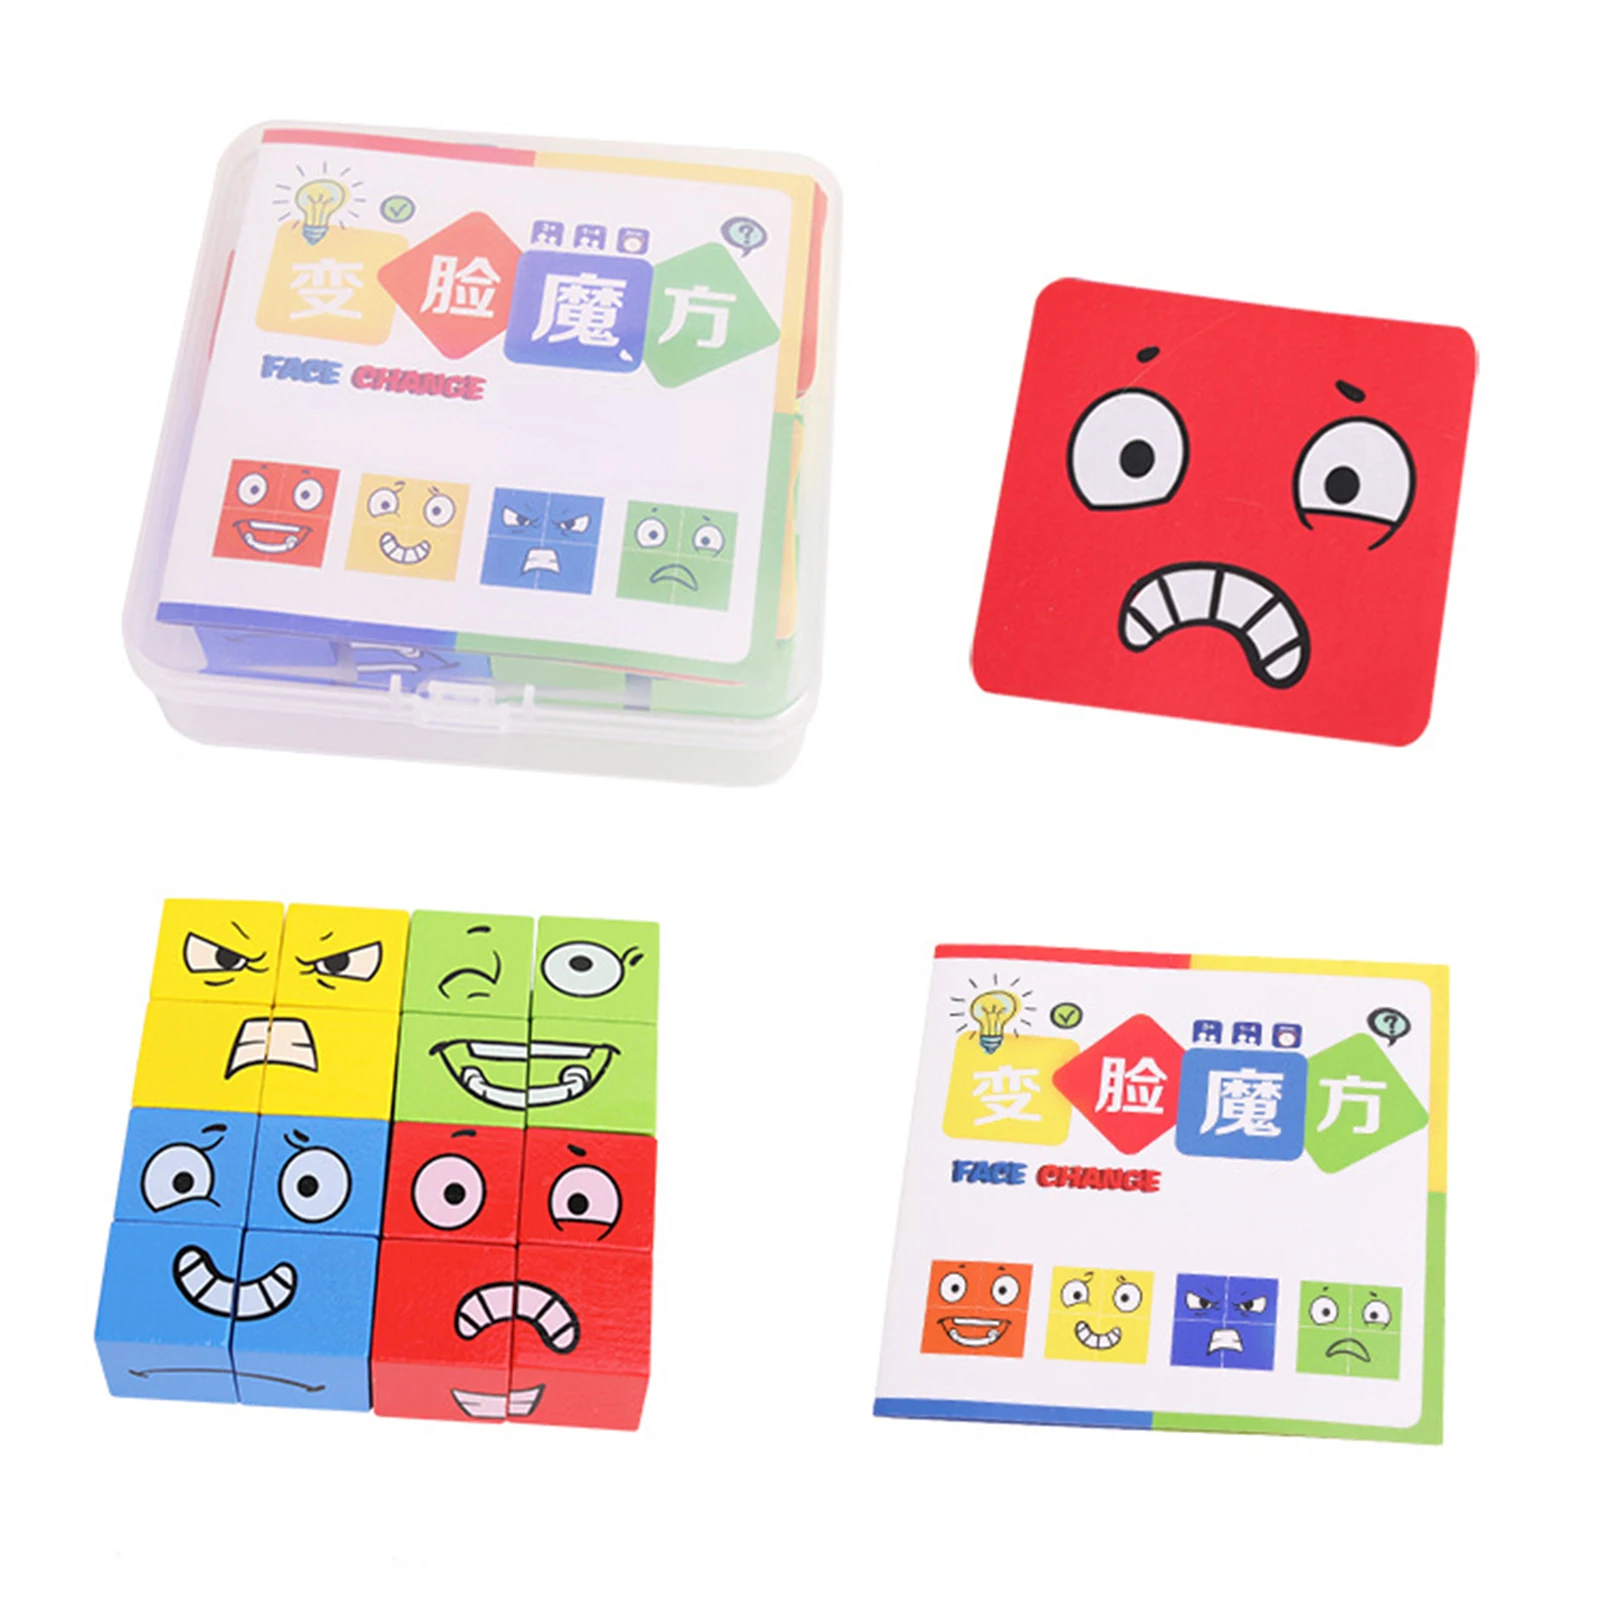 

Montessori Expression Puzzle Face Change Cube Building Blocks Toys Logical Early Learning Educational Match Toy Magic Cubes